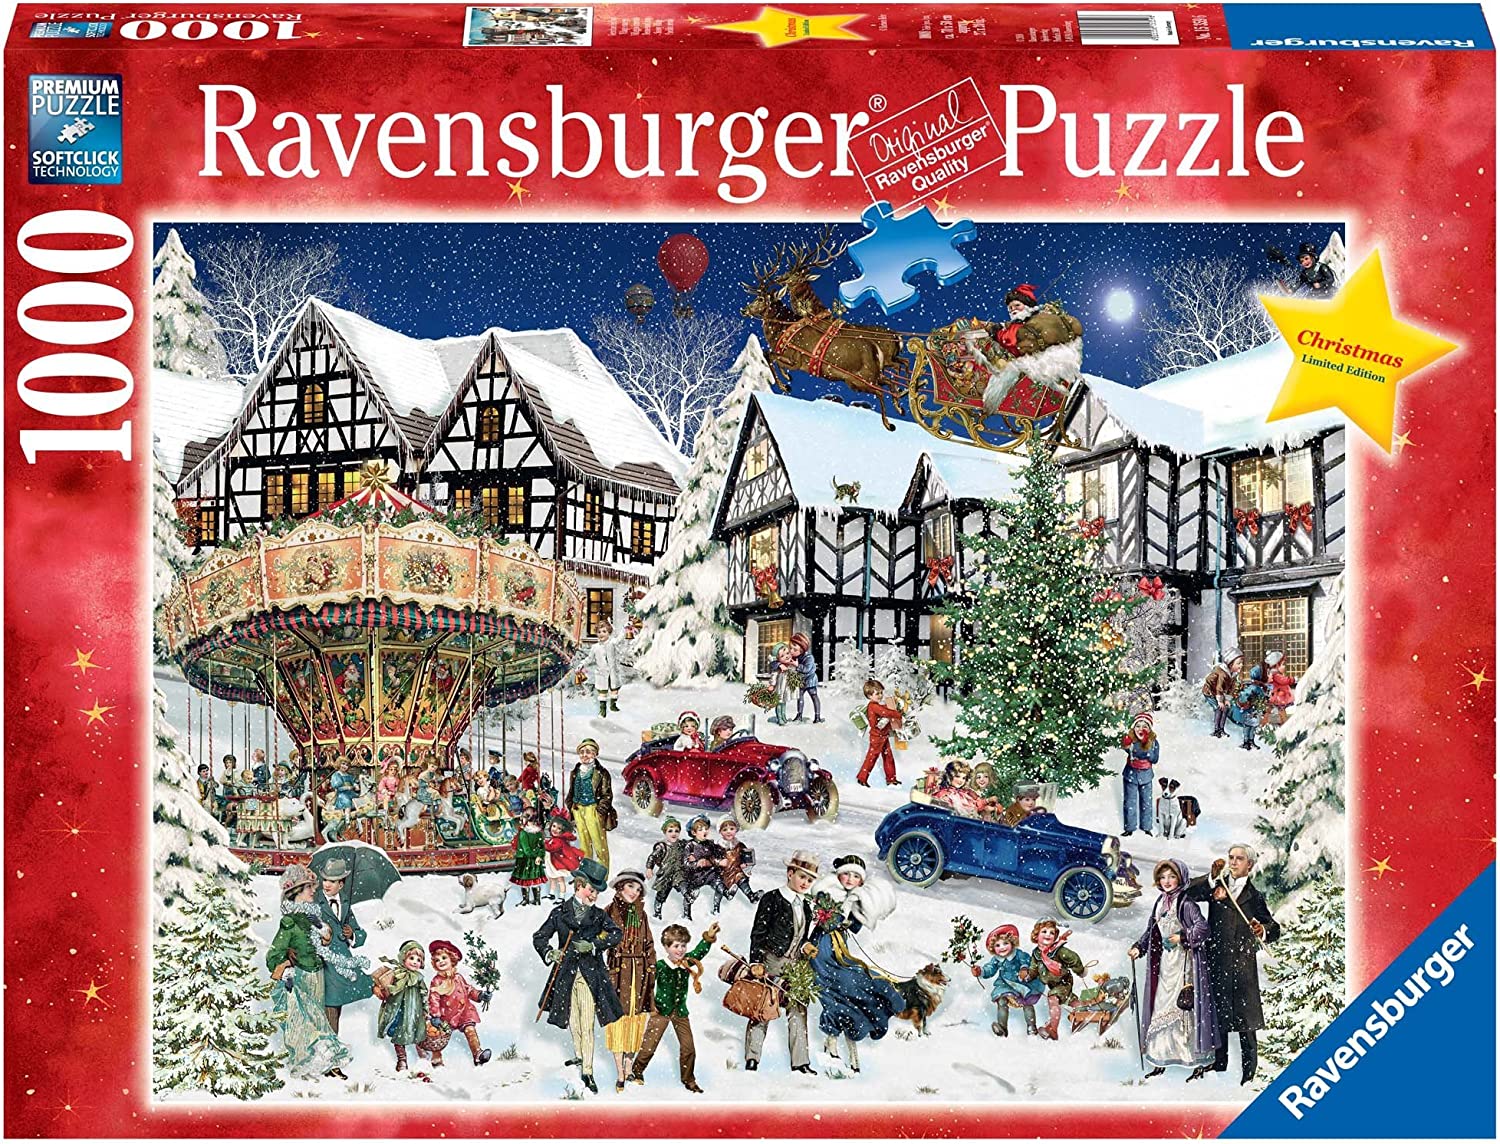 Ravensburger Christmas Limited Edition Snowy Village 1000 Piece Puzzle